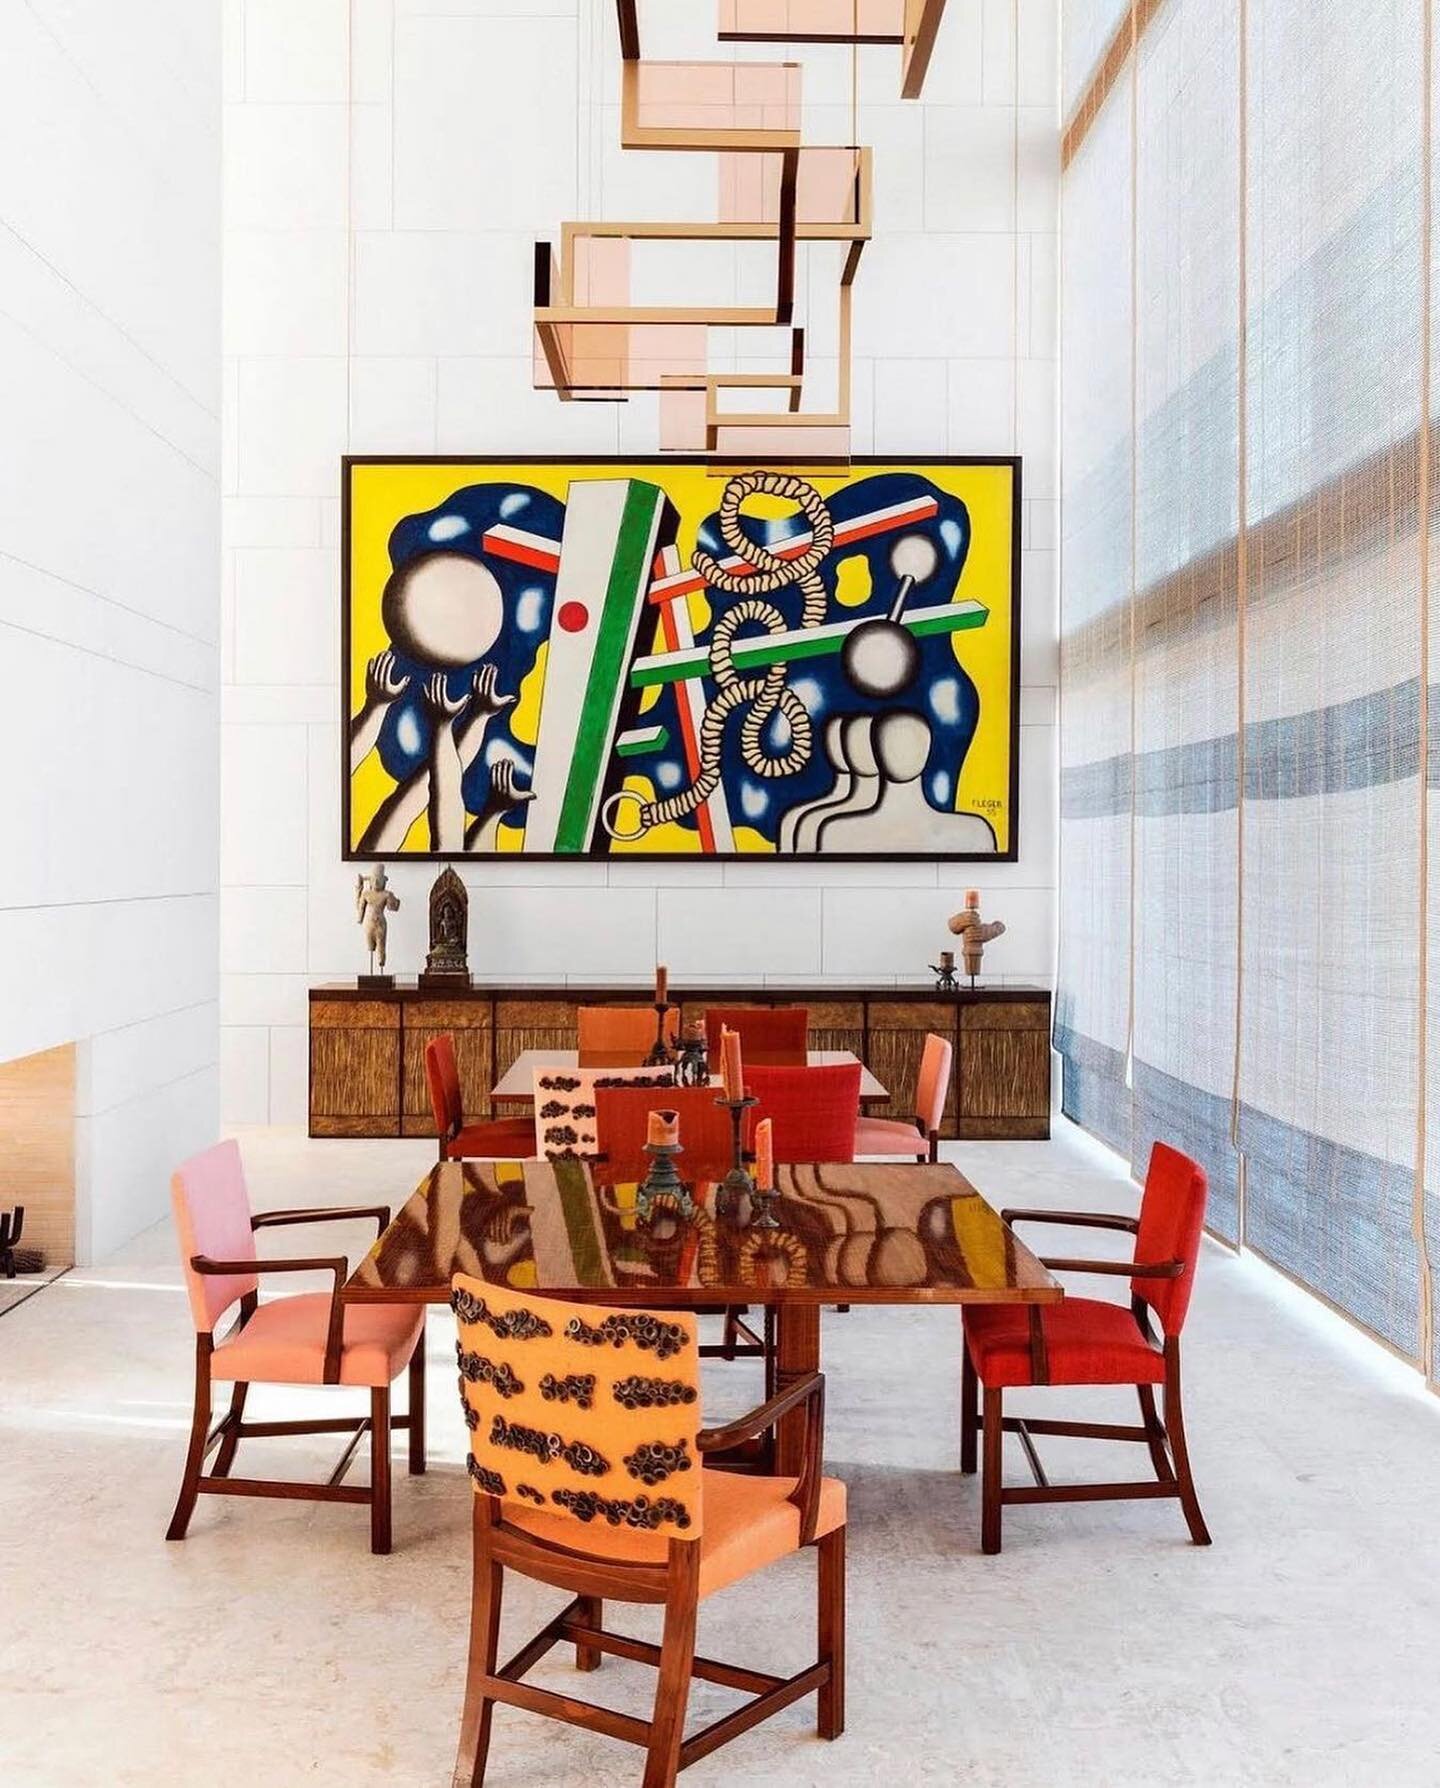 My absolute dream dining room. Architecure by @petermarinoarchitect and painting by Fernand L&eacute;ger.  What is your favorite part of this room?!

#interiorinspo #interiordecor #diningroominspo #architecture #interiordesign